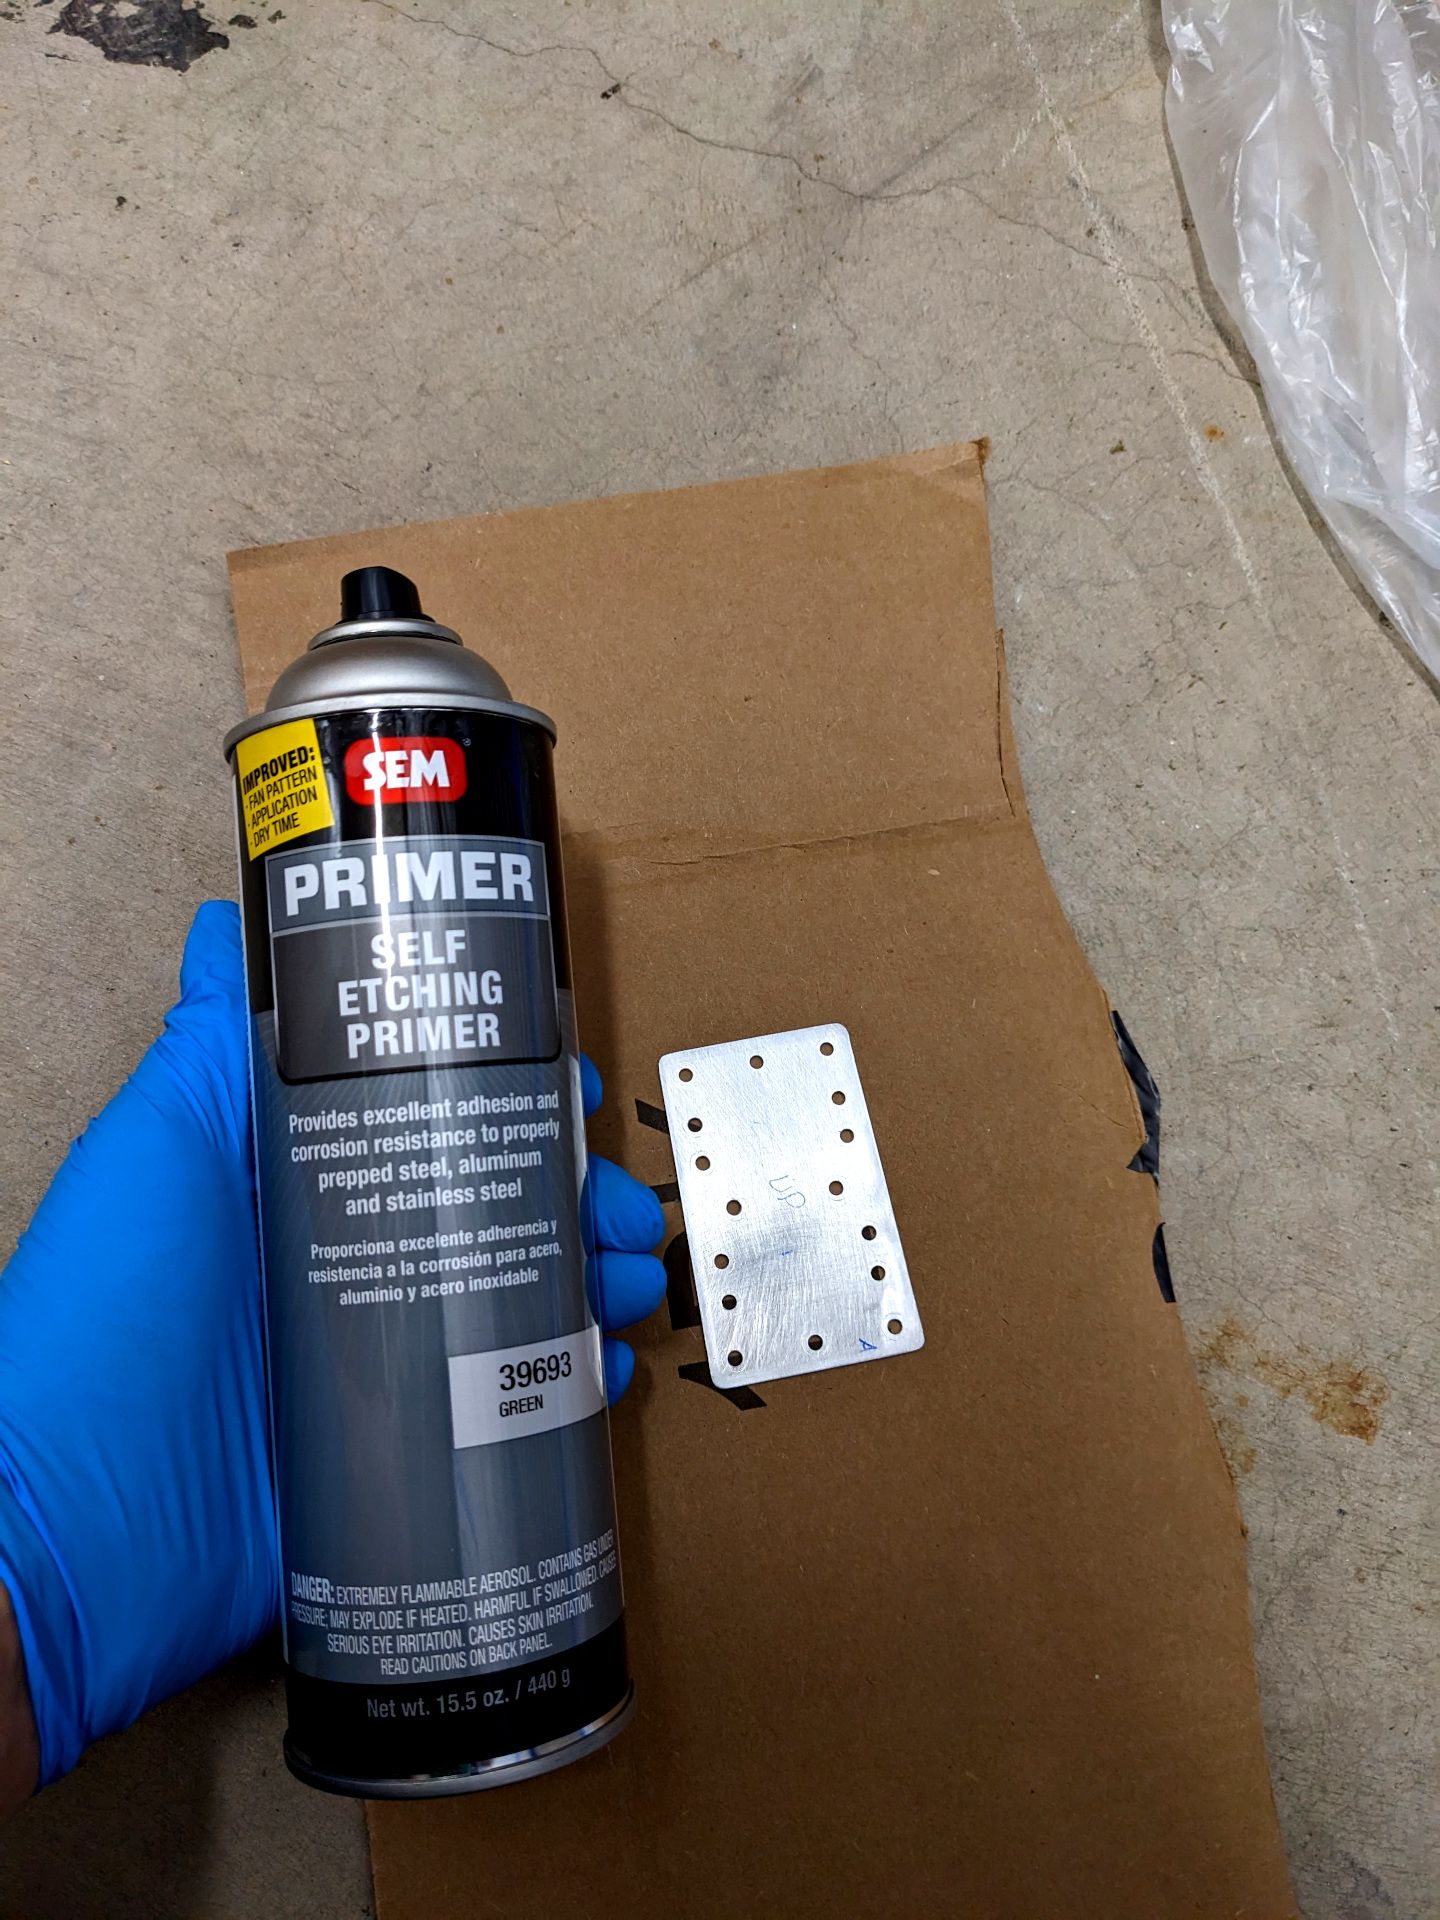 Small aluminum part on cardboard next to gloved hand holding SEM brand self etching primer